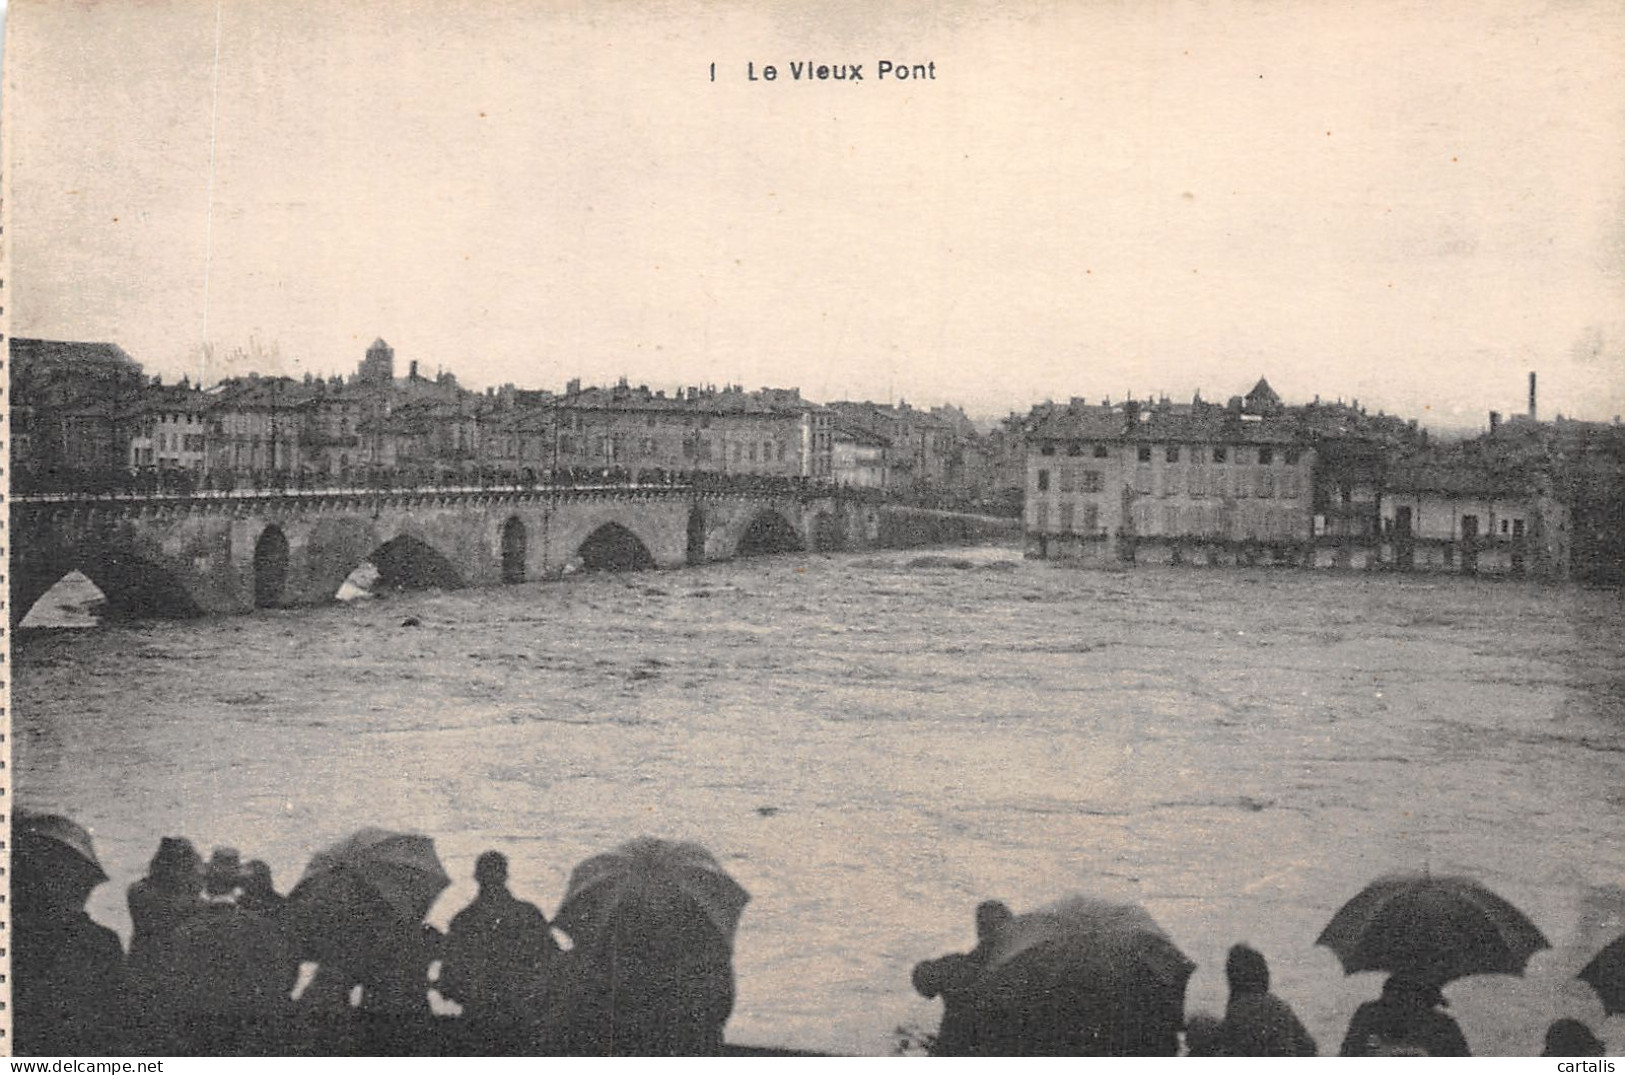 ID-LE VIEUX PONT -N°4189-A/0067 - To Identify